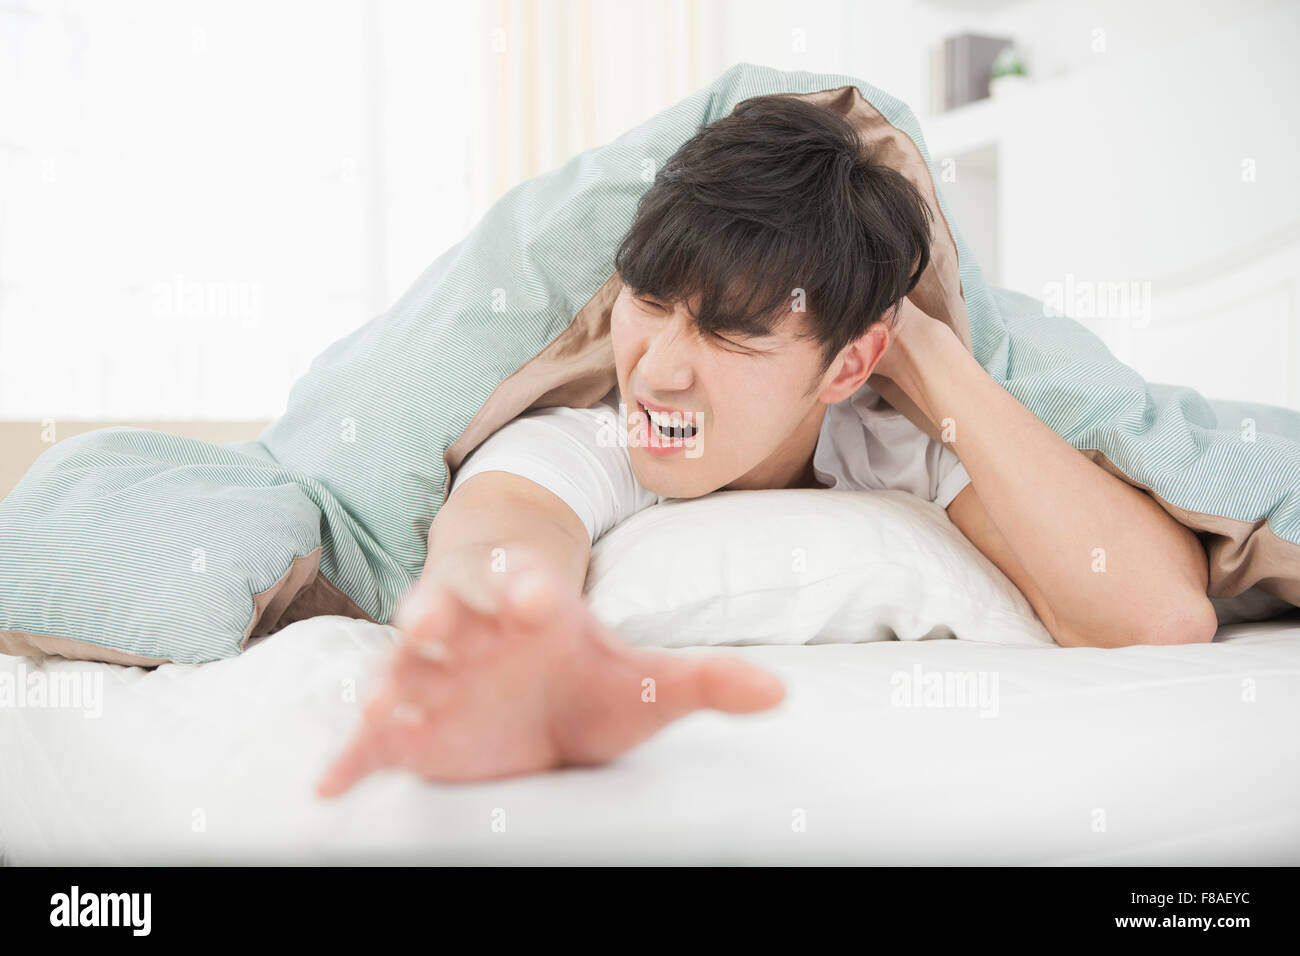 Stressed man lying on his face side and stretching his hand out Stock Photo